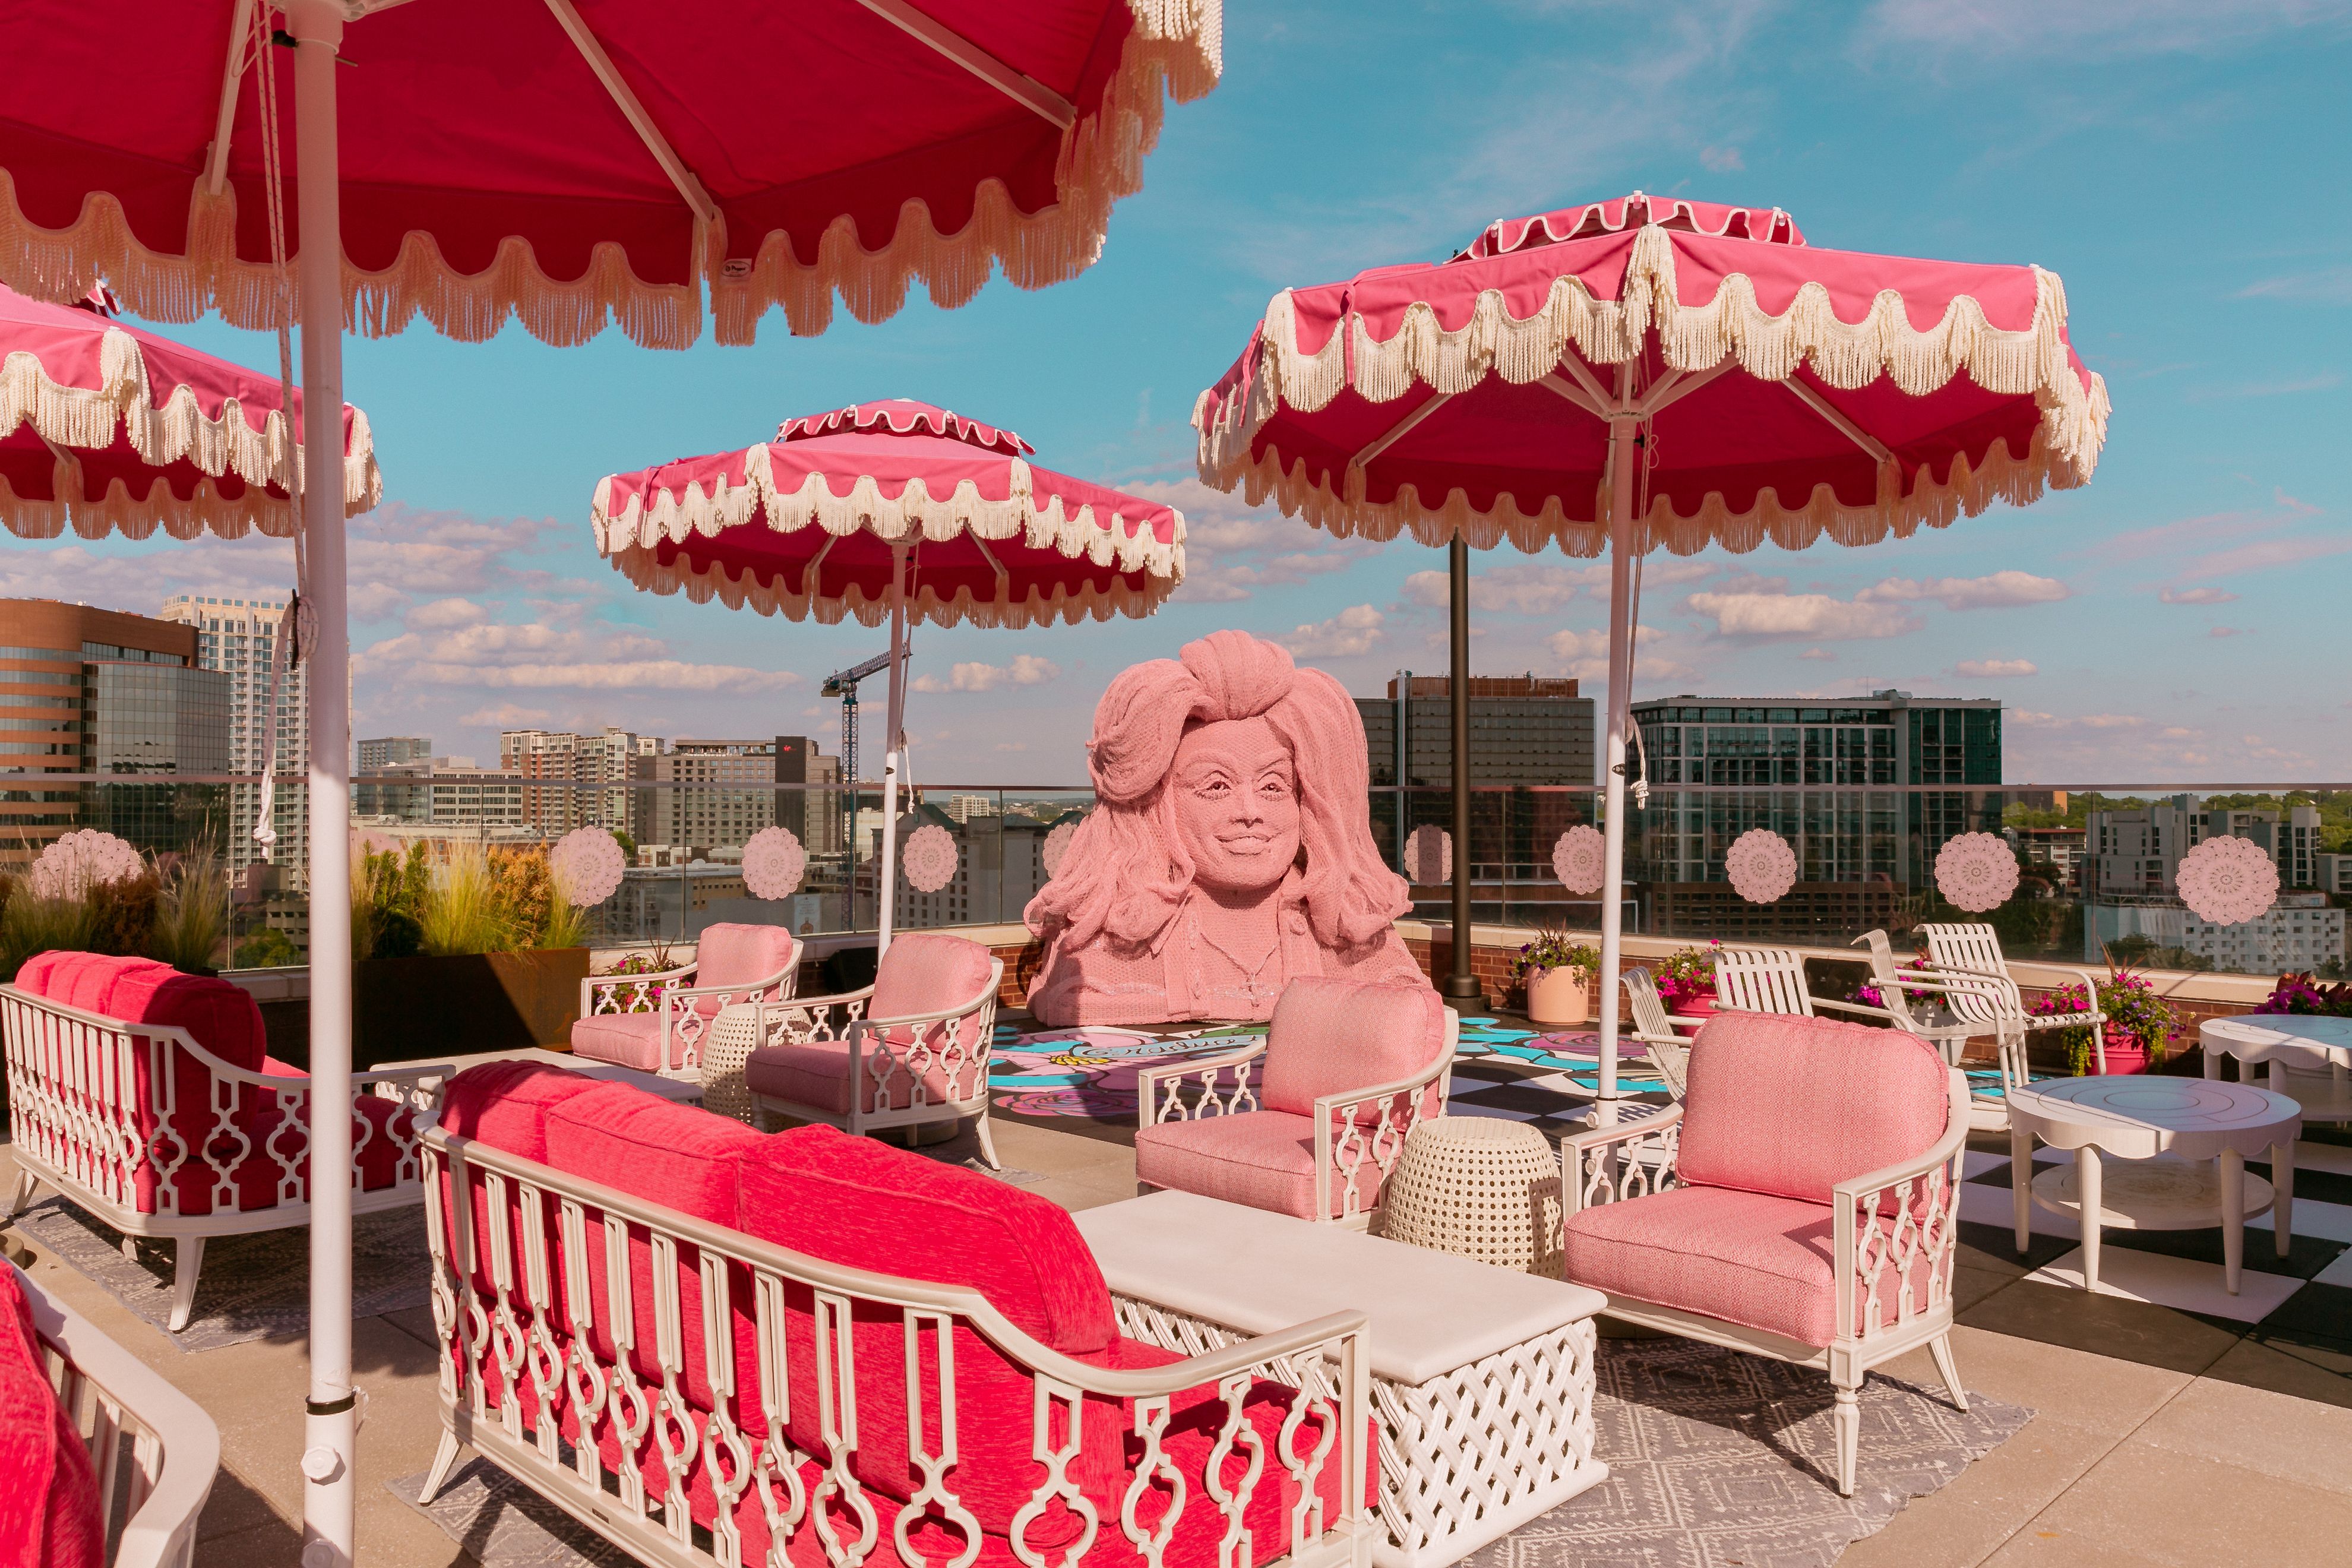 A pink bust of Dolly Parton on a rooftop